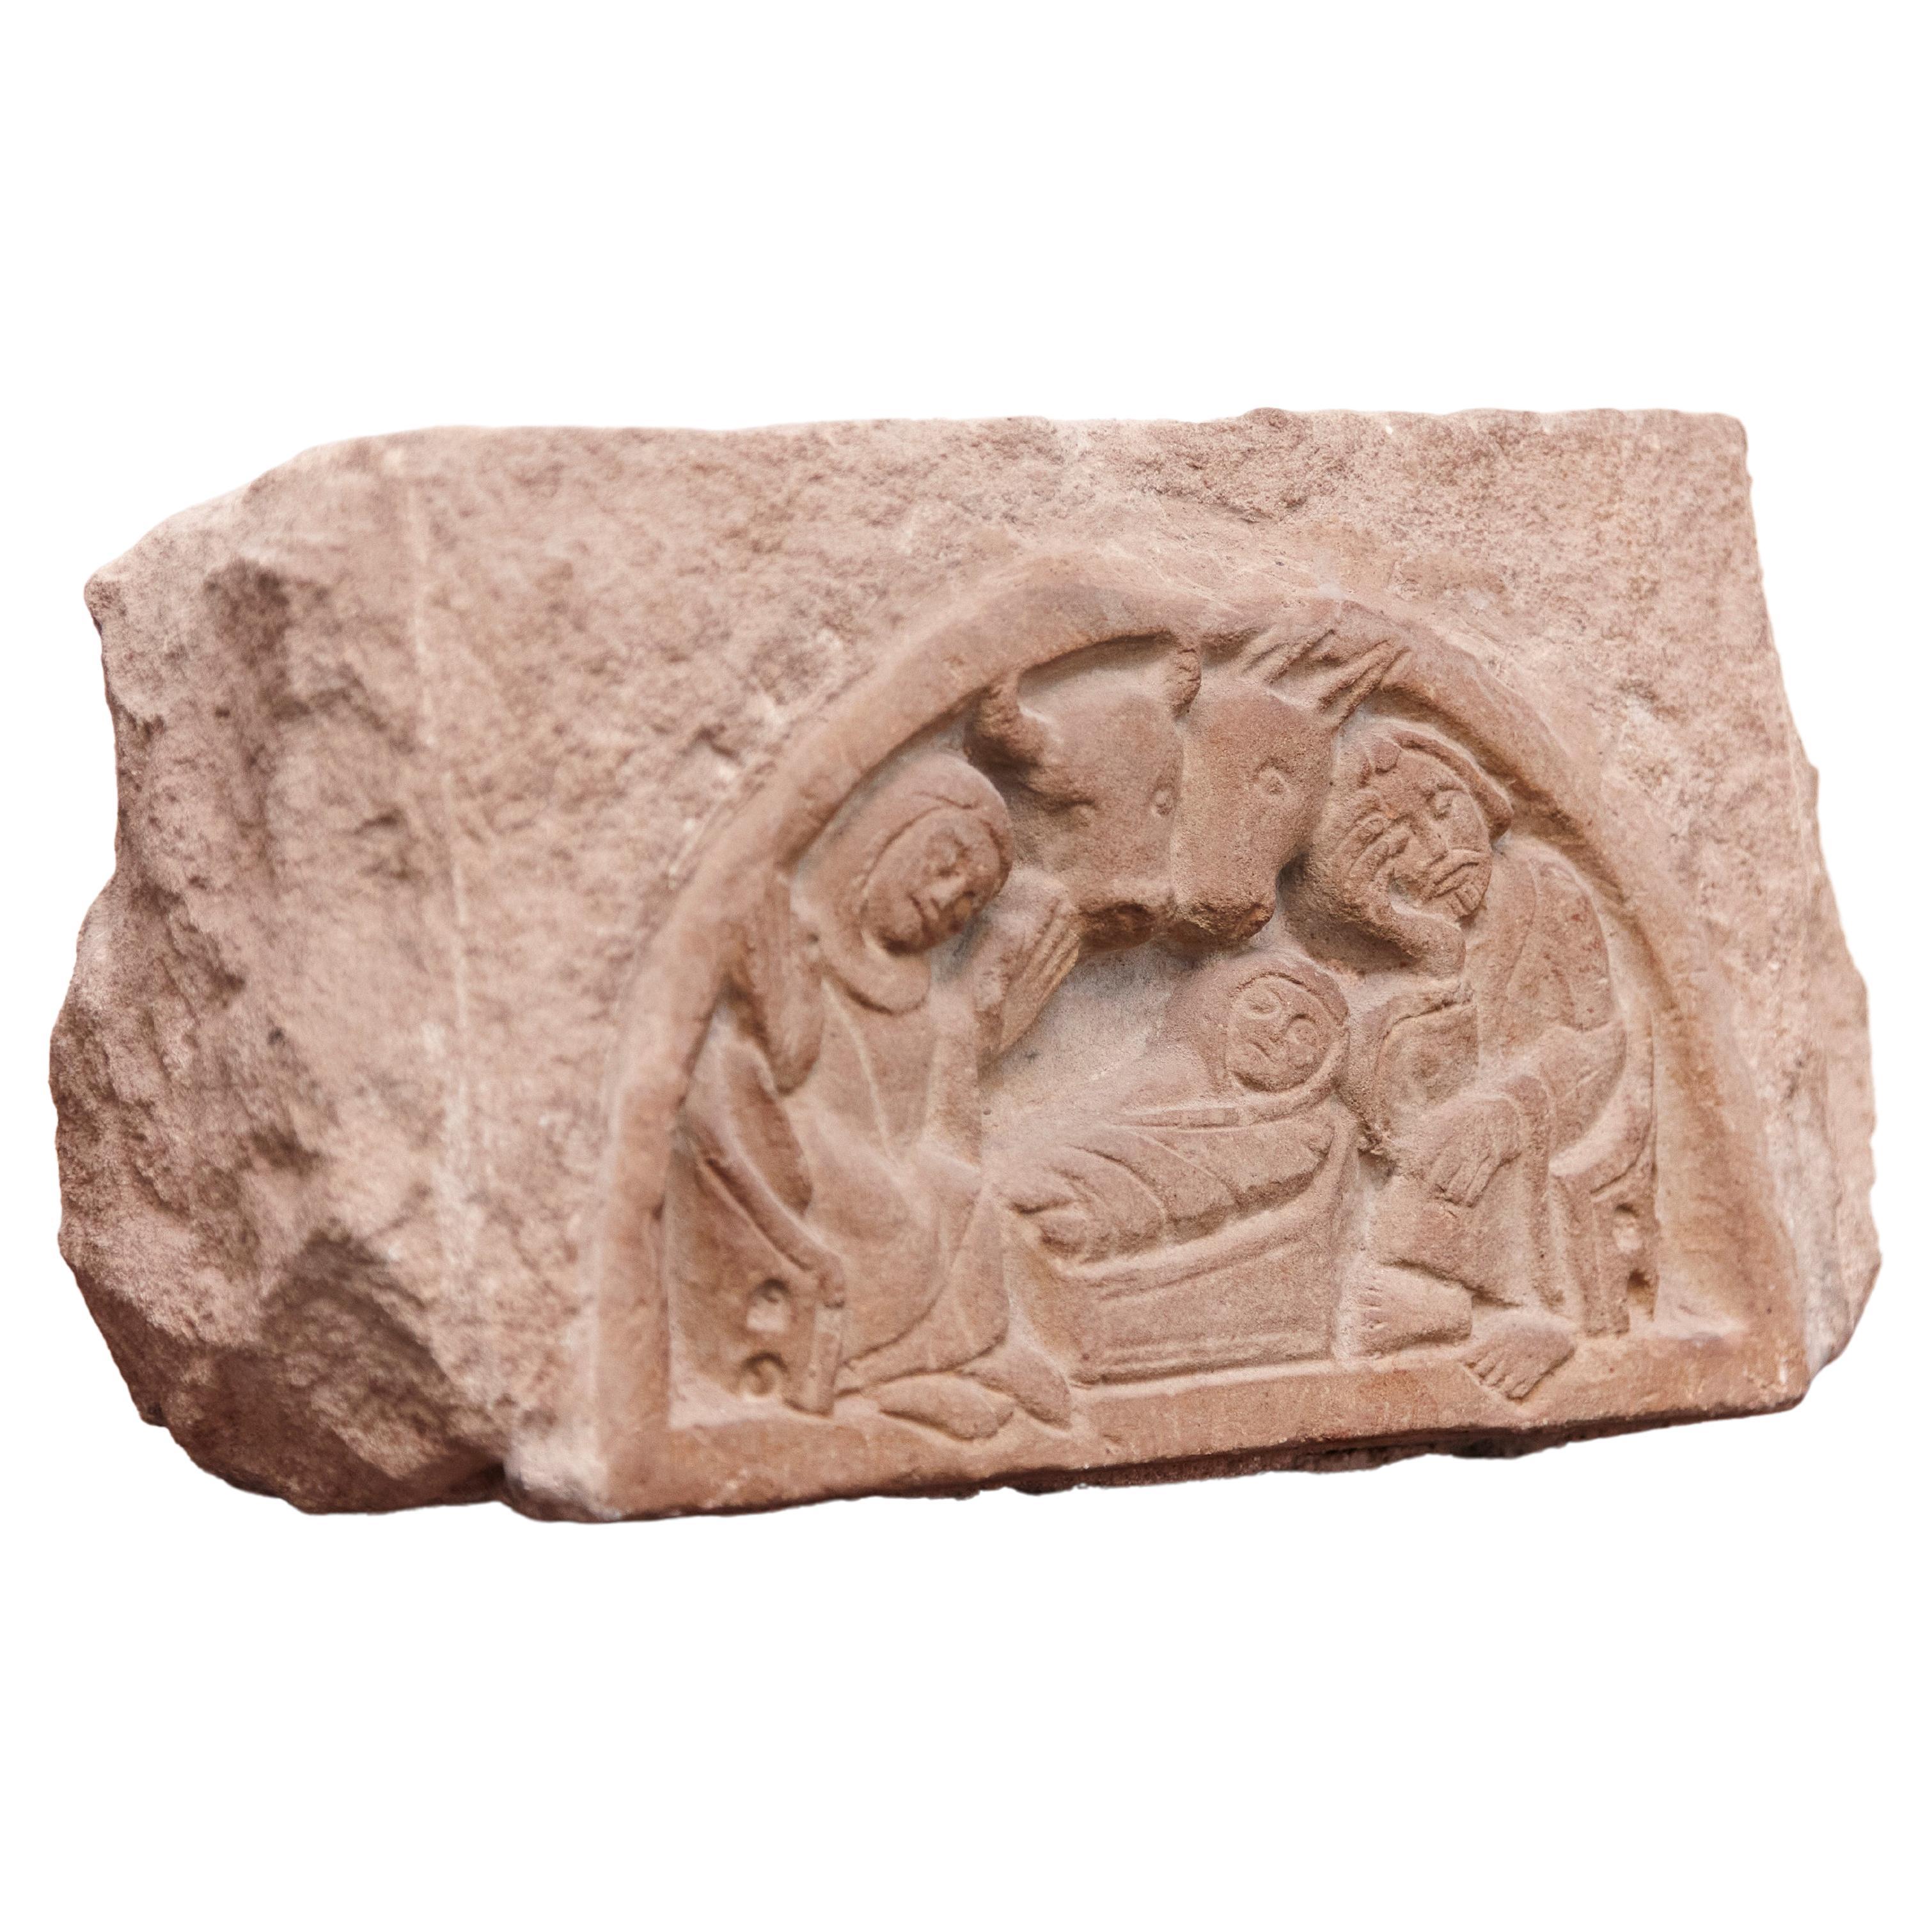 Nativity Engraved Stone Sculpture, circa 1930 For Sale